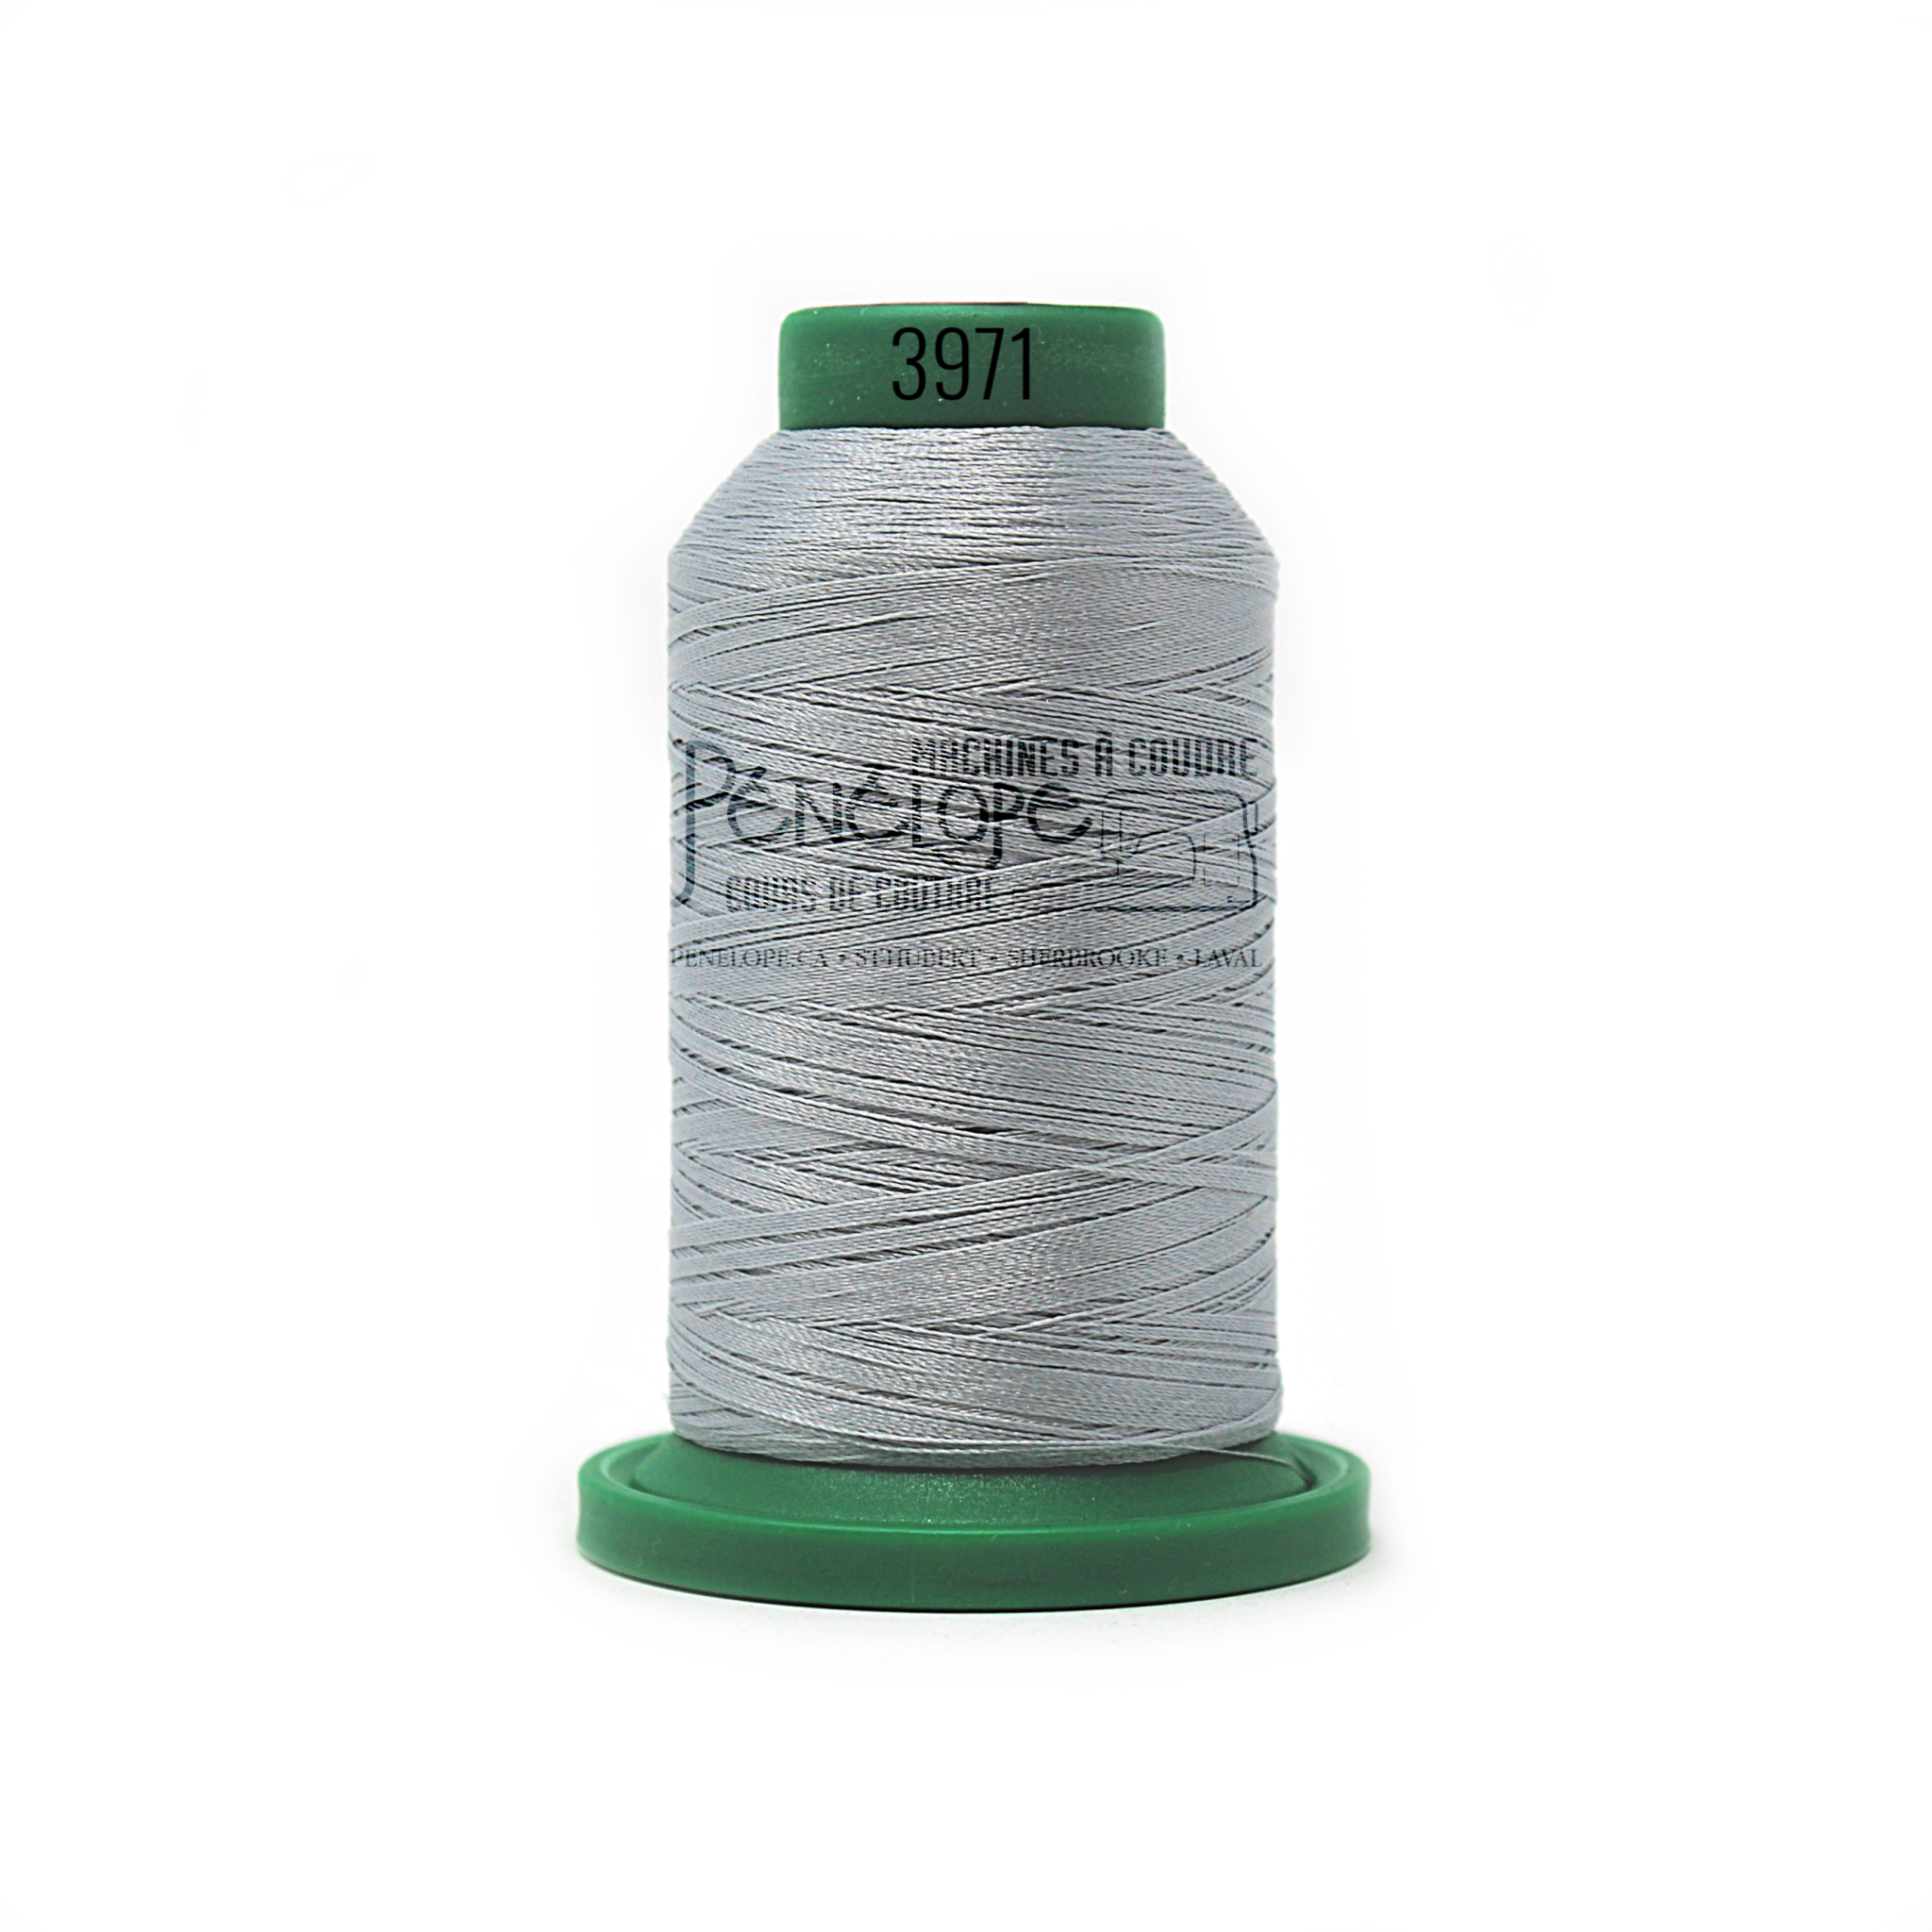 Isacord Isacord sewing and embroidery thread 3971